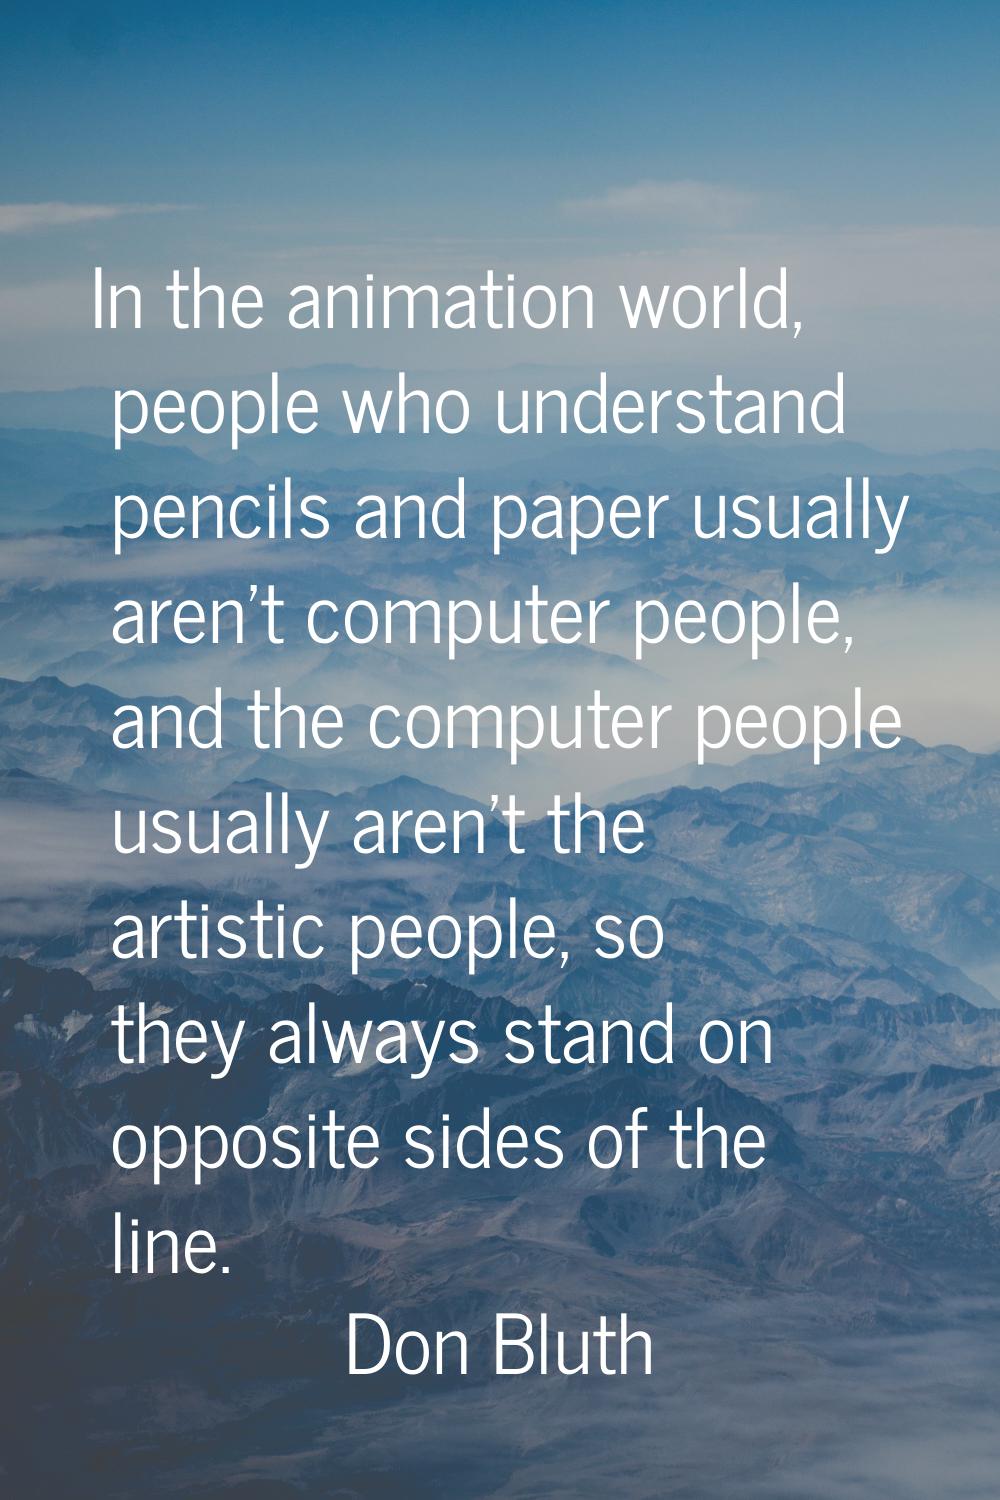 In the animation world, people who understand pencils and paper usually aren't computer people, and